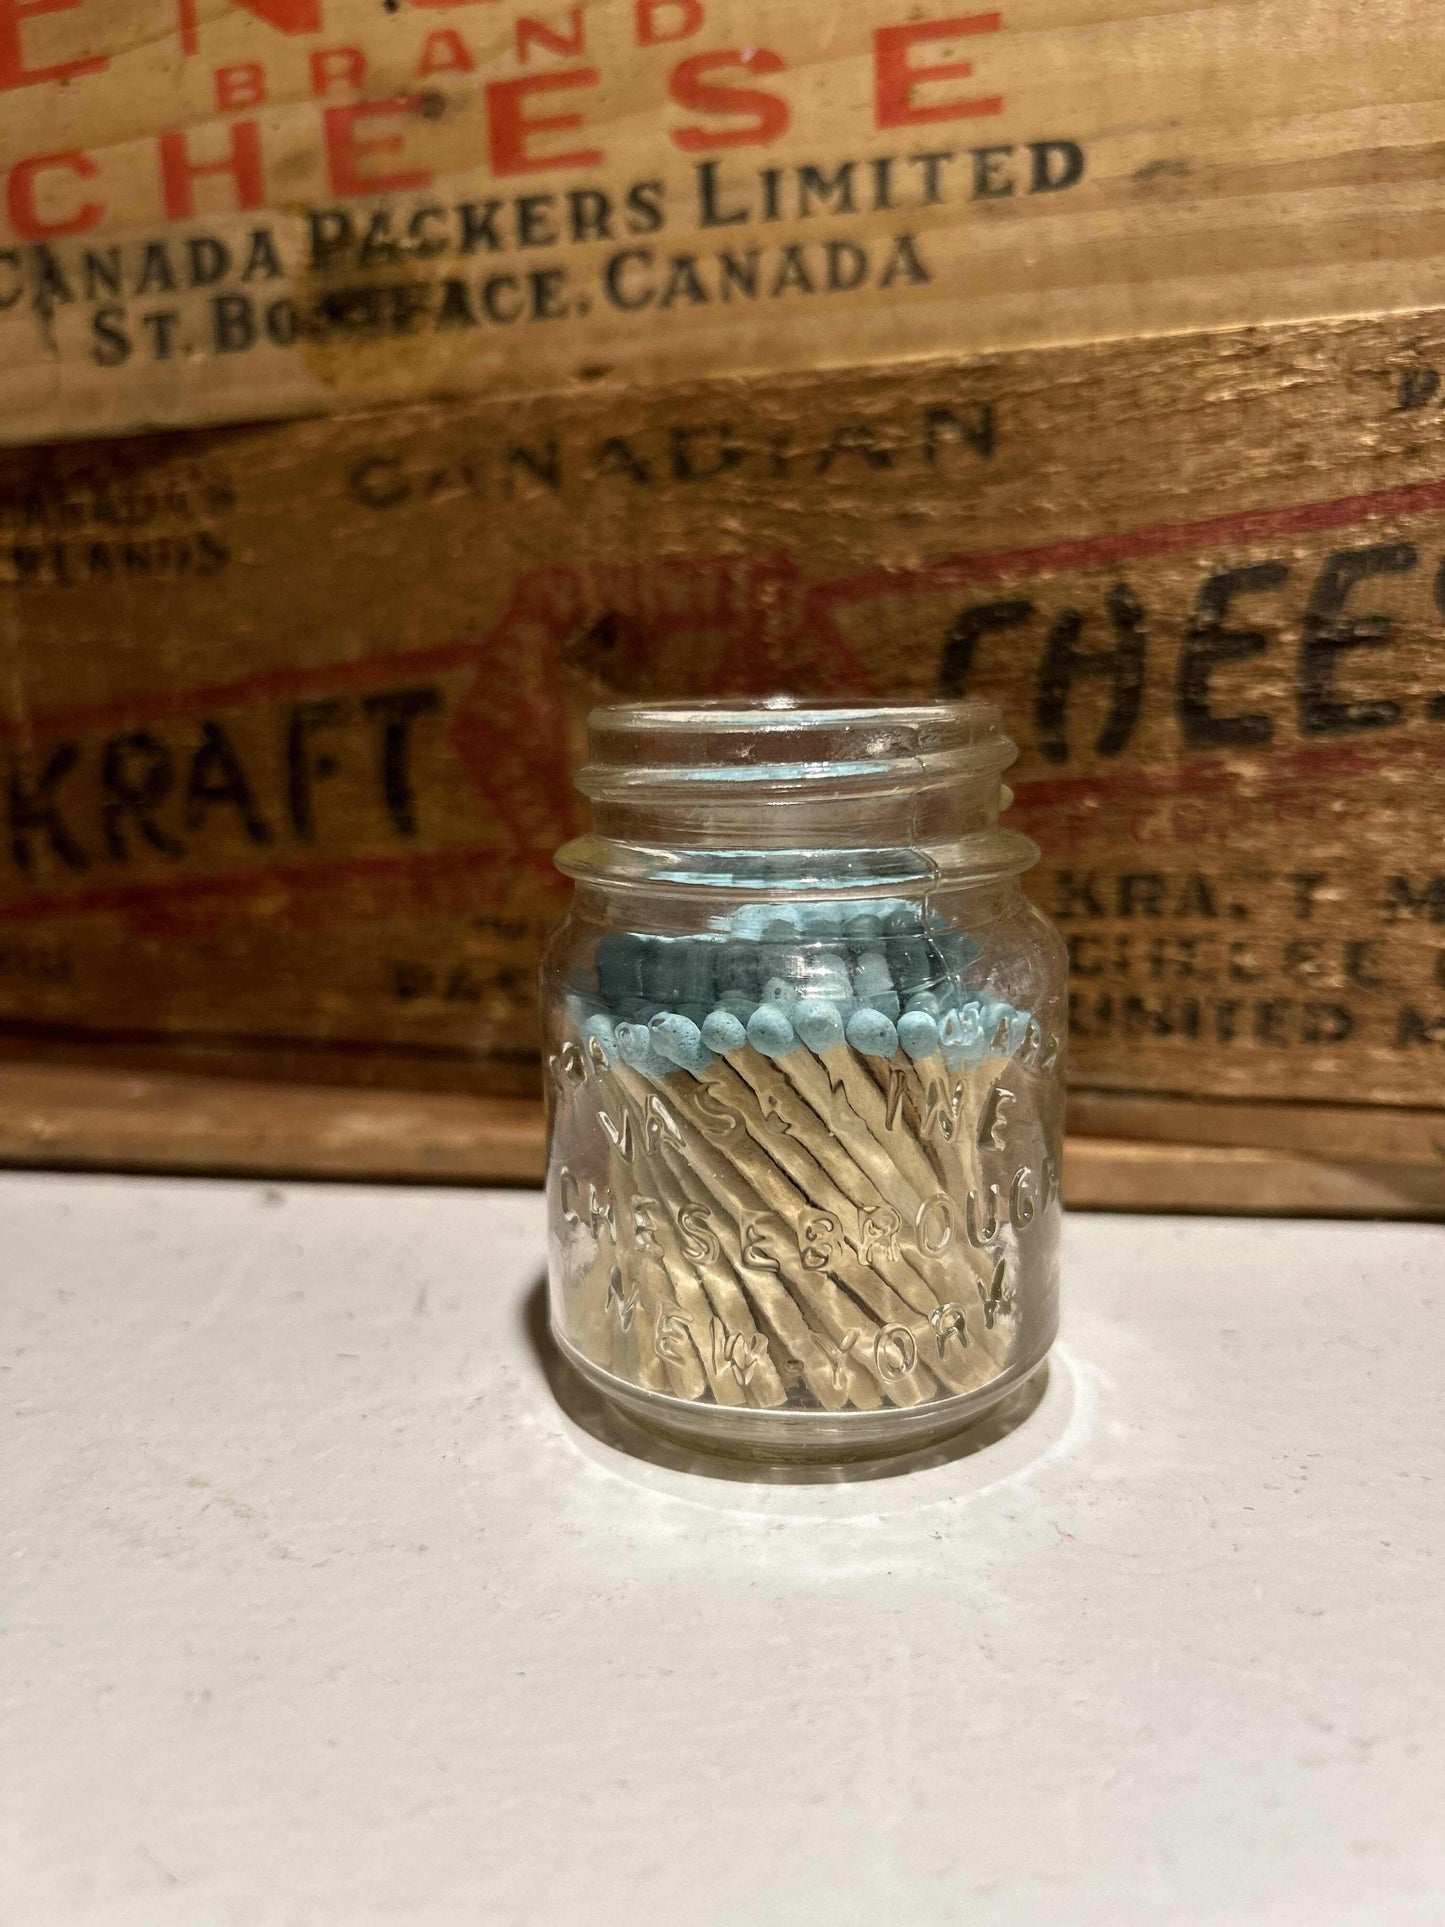 Small Antique Vaseline JarMatch VesselSmall Antique Vaseline Jar mudlarked from one of the rivers in Manitoba, now repurposed as a match vessel! Filled with colored matches made of aspen wood, hand craftSmall Antique Vaseline JarCG Pure Wash